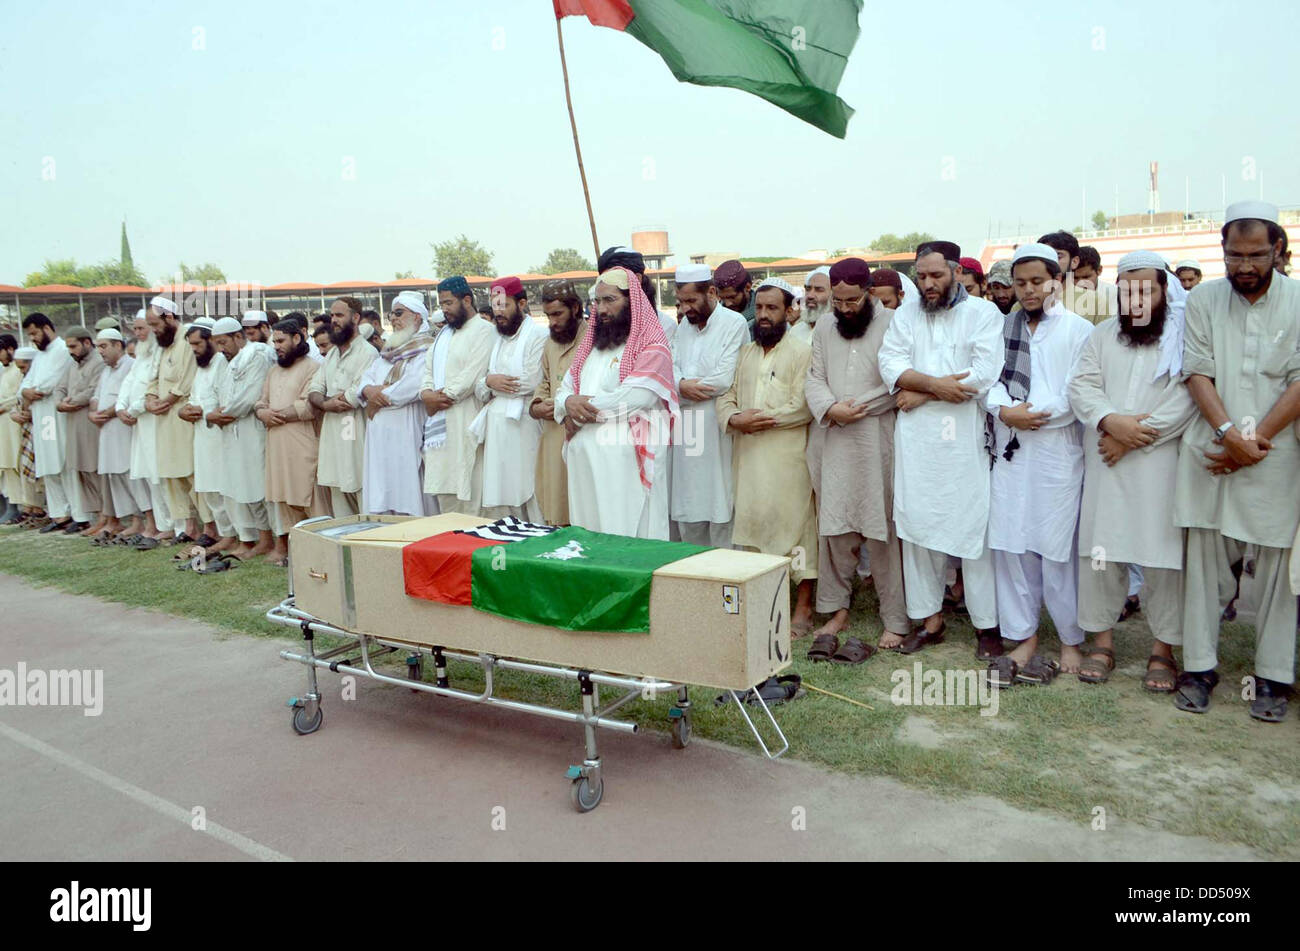 Activists of Ahle Sunnat Wal Jamat offering funeral prayer of their leader and spokesman, Akbar Saeed Farooqi who gunned down by unidentified gunmen in Gulshan-e-Iqbal on Sunday in Karachi, on Qayyum Stadium in Peshawar on Monday, August 26, 2013. Stock Photo